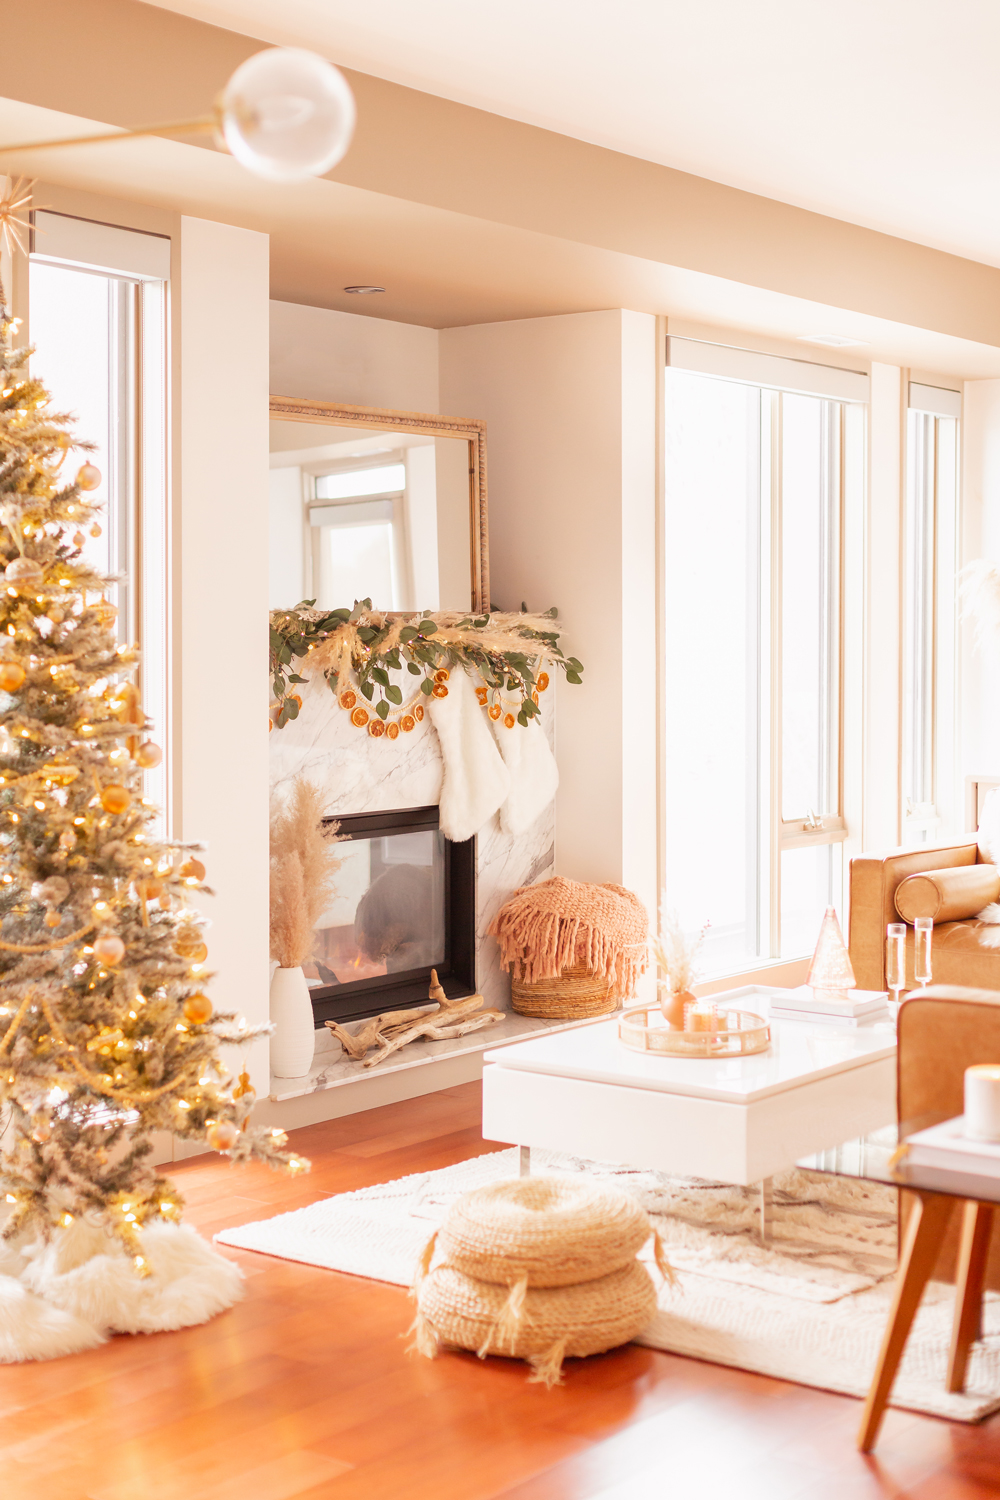 Mid Century Meets Boho Holiday Decor 2021 | Bright & airy Mid Century Modern Living Room with a Flocked Christmas Tree and Sputnik Metallic Tree Topper | Boho eucalyptus garland with pampas grass, fresh cedar, bleached Italian ruscus and a beaded dried orange garland | Boho Christmas Decorating Ideas for Apartments | Flocked Christmas Tree with Wood Garland and Boho Ornaments | Holiday Home Tour | Boho Chic Christmas Decor | Glam neutral holiday decor | Boho Christmas Tree // JustineCelina.com